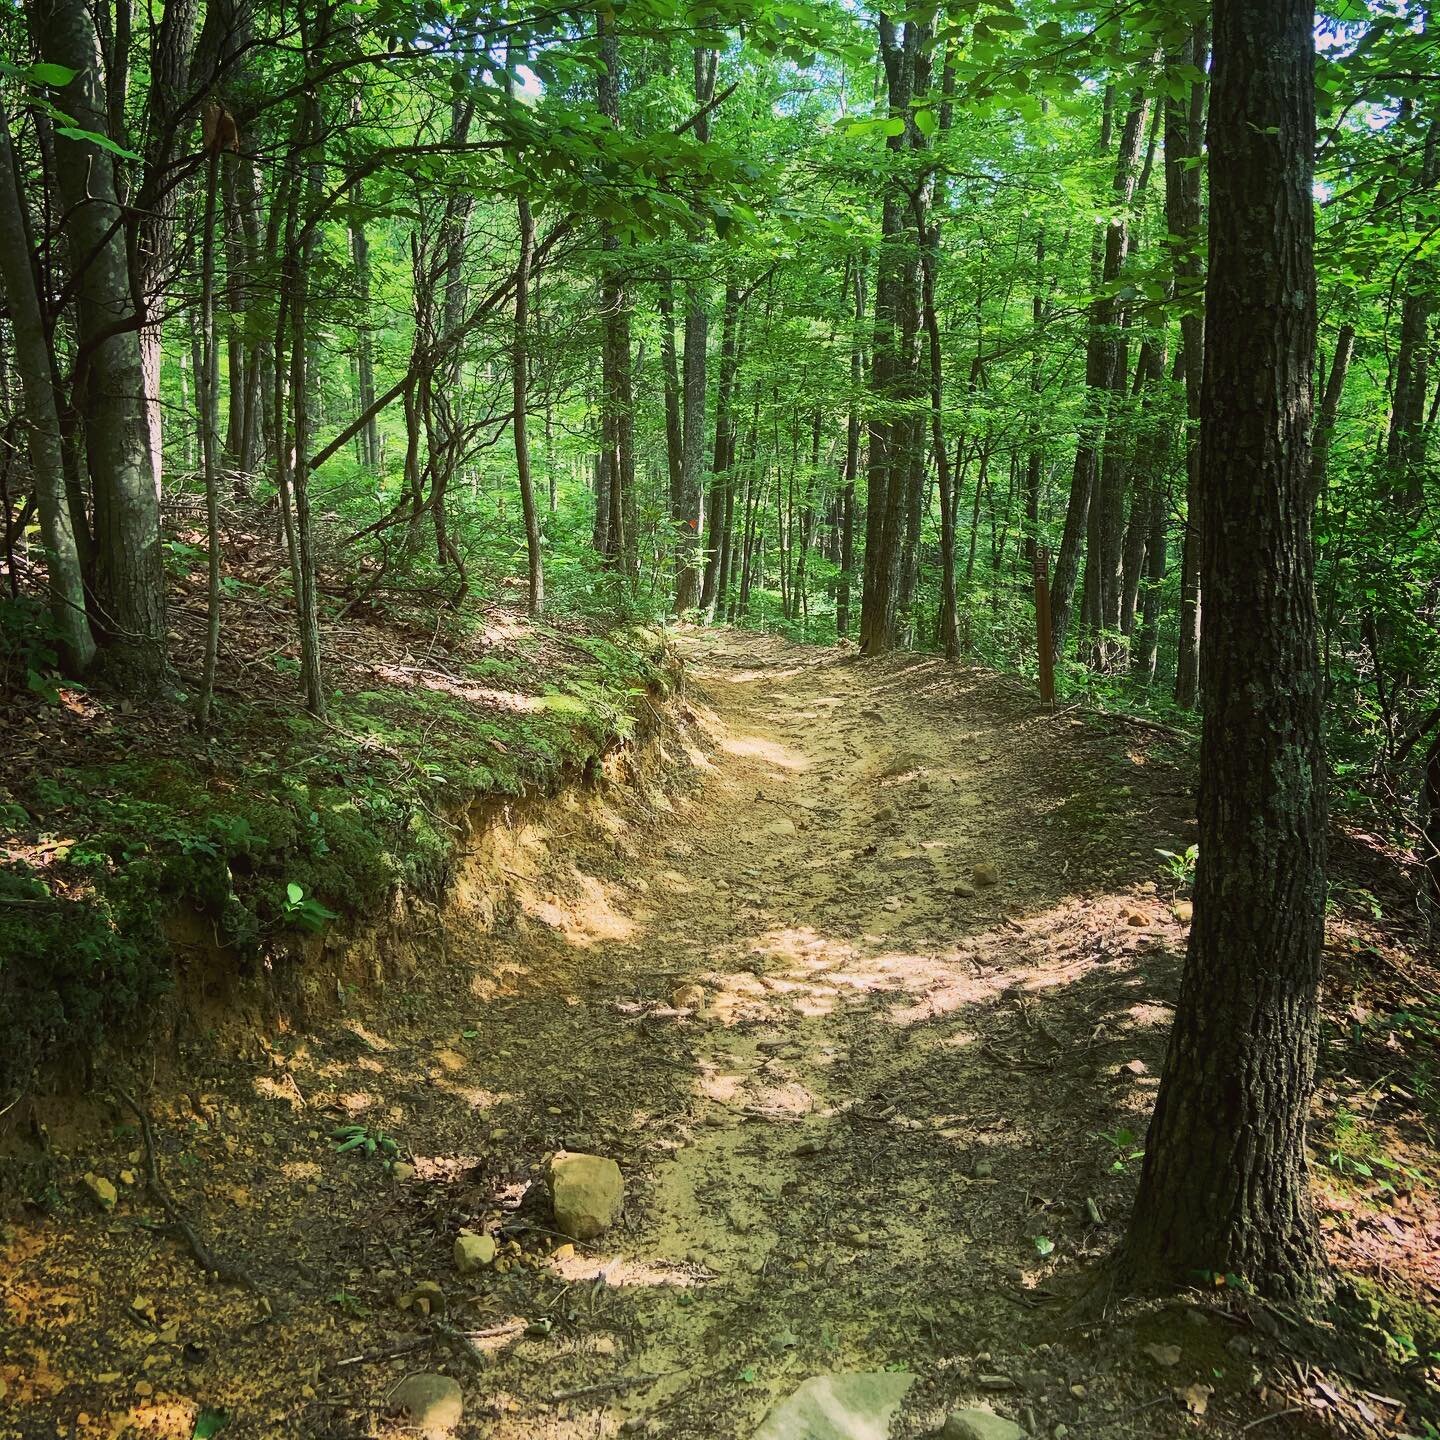 Final trail section of War Daddy and Sandlin&rsquo;s Shred. Some parts are awesome and some still need some tidying up.  But fun nonetheless!